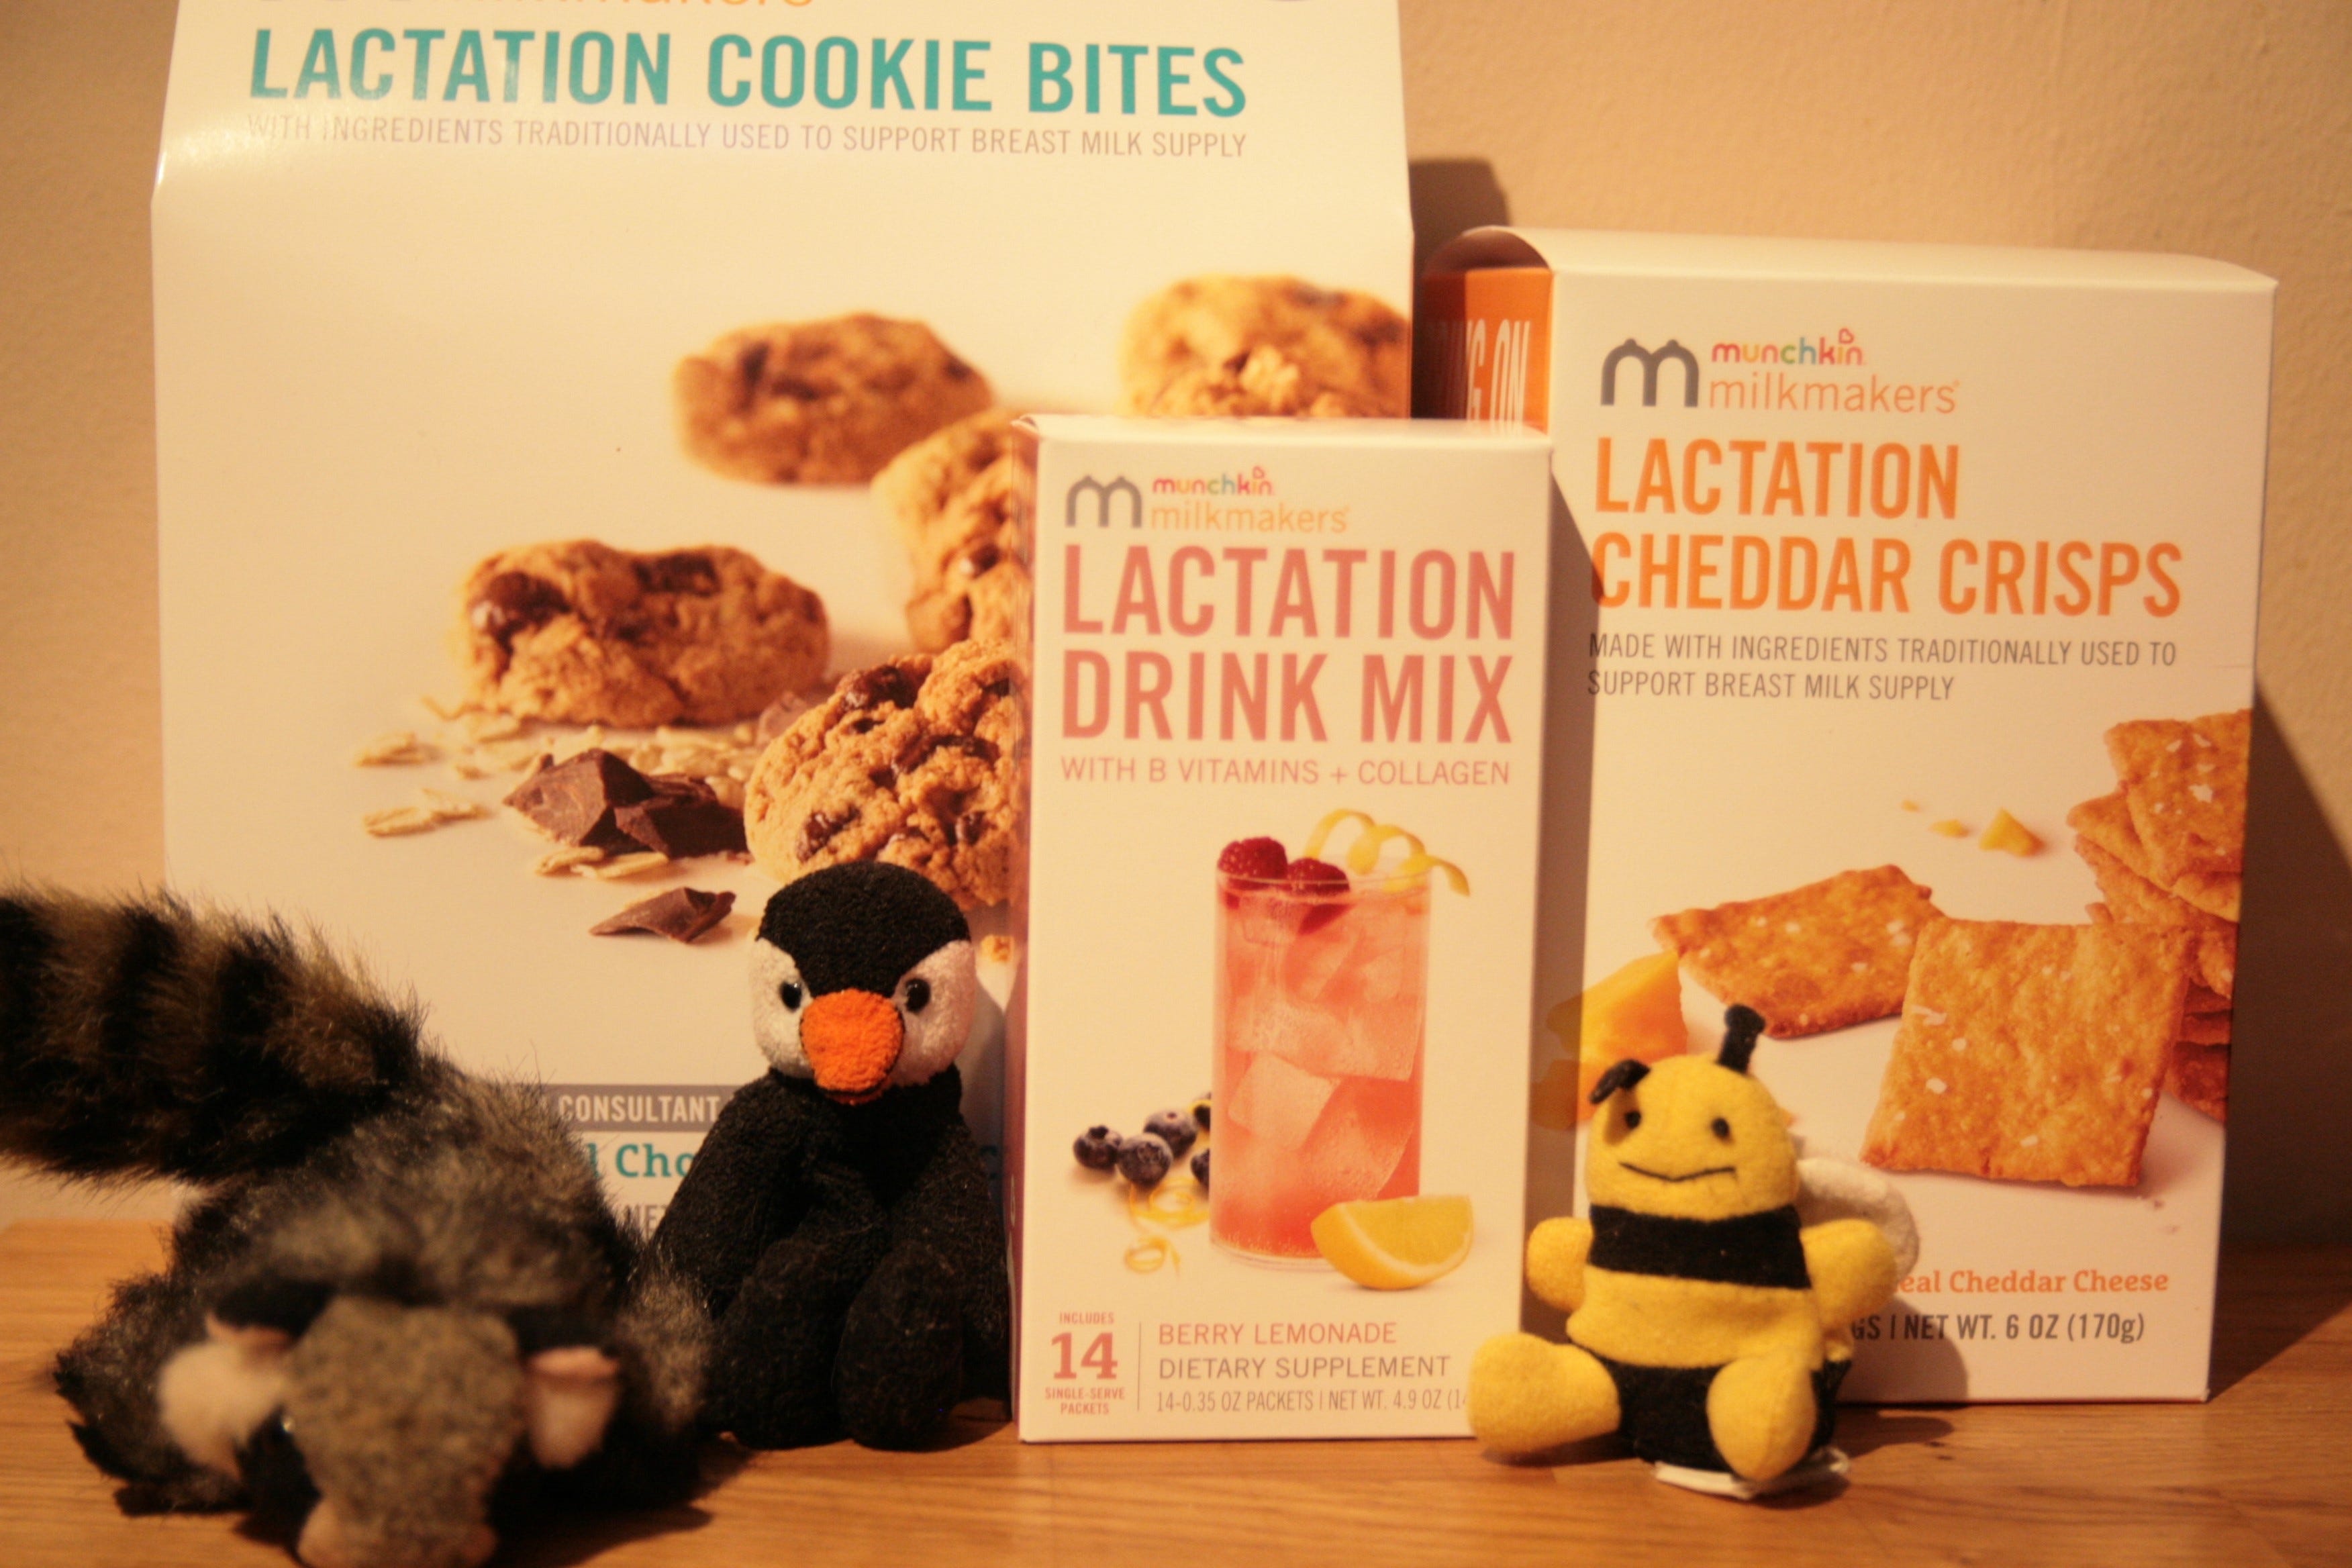 Let's make some milk: Who wants lactation snacks?